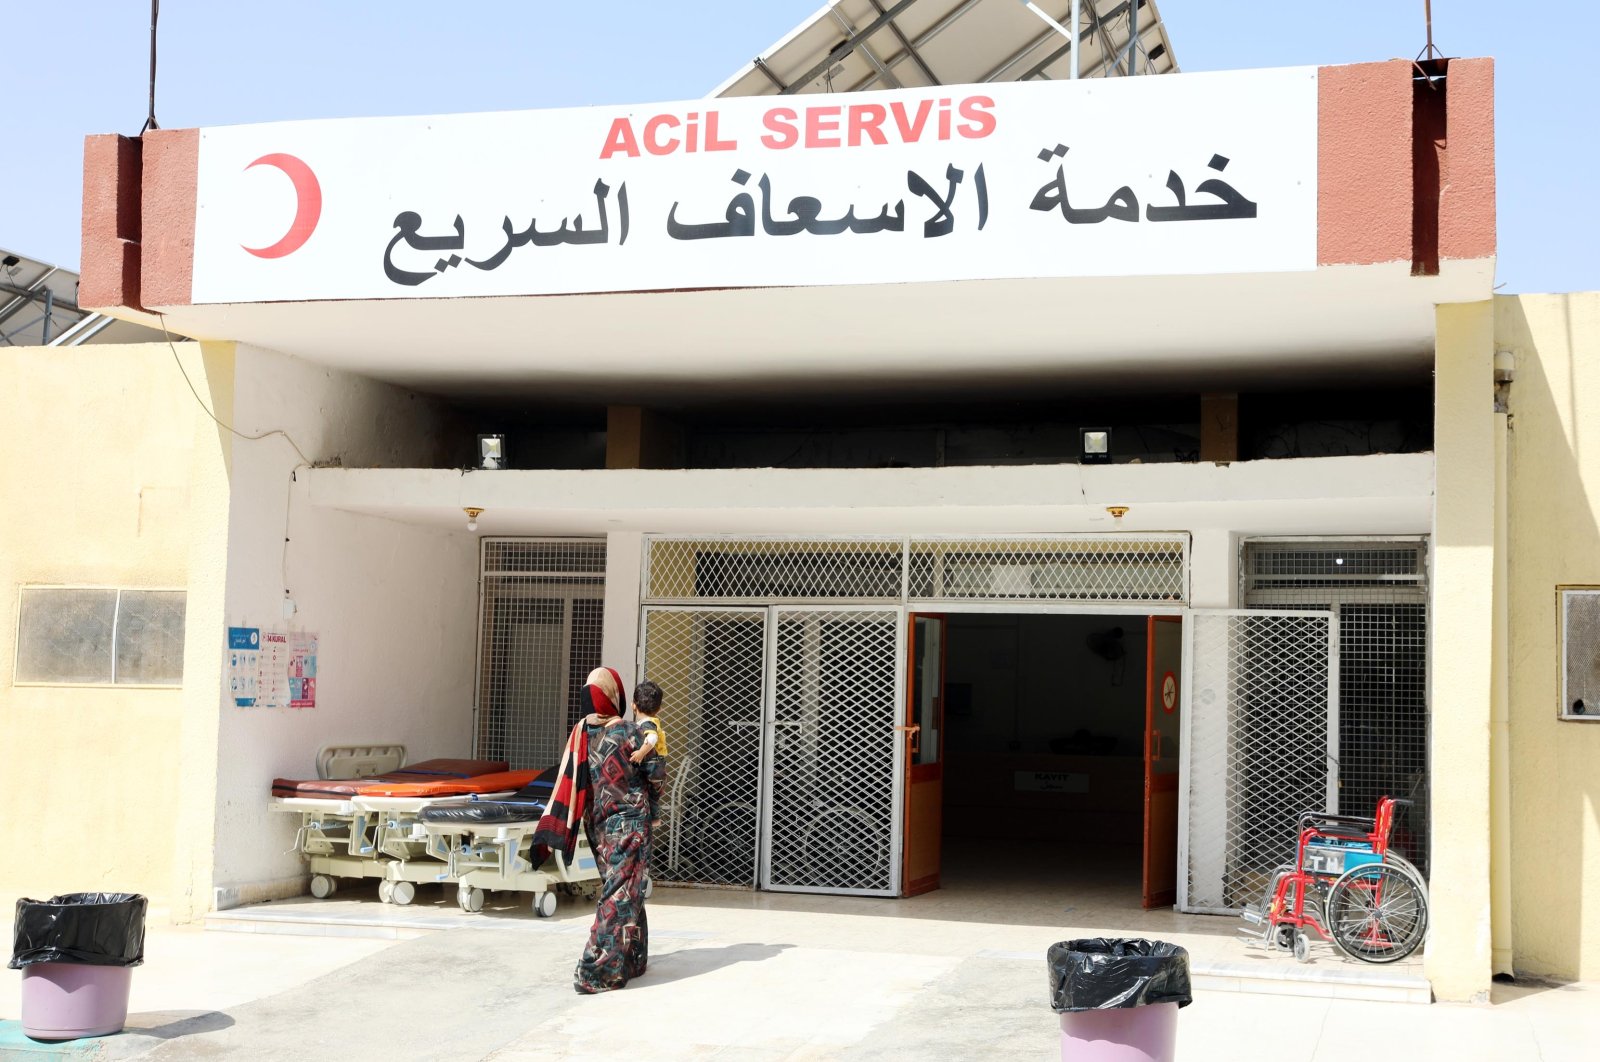 Reconstructed Tal Abyad hospital serves about 800 patients daily, Tal Abyad, Syria, Sept.18, 2020. (DHA)